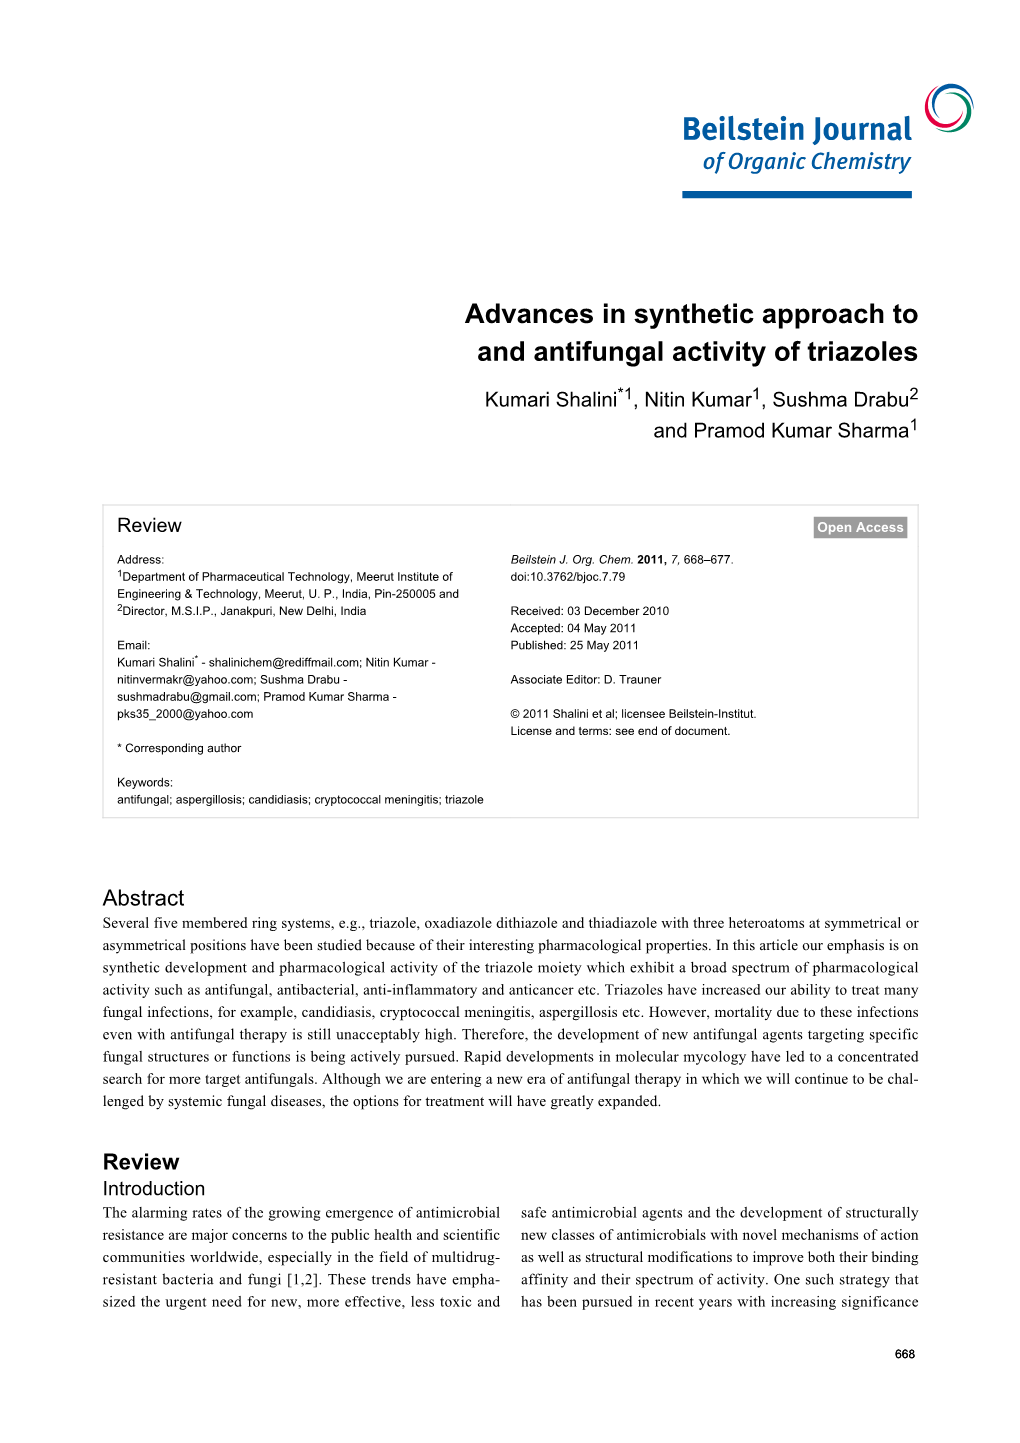 Advances in Synthetic Approach to and Antifungal Activity of Triazoles